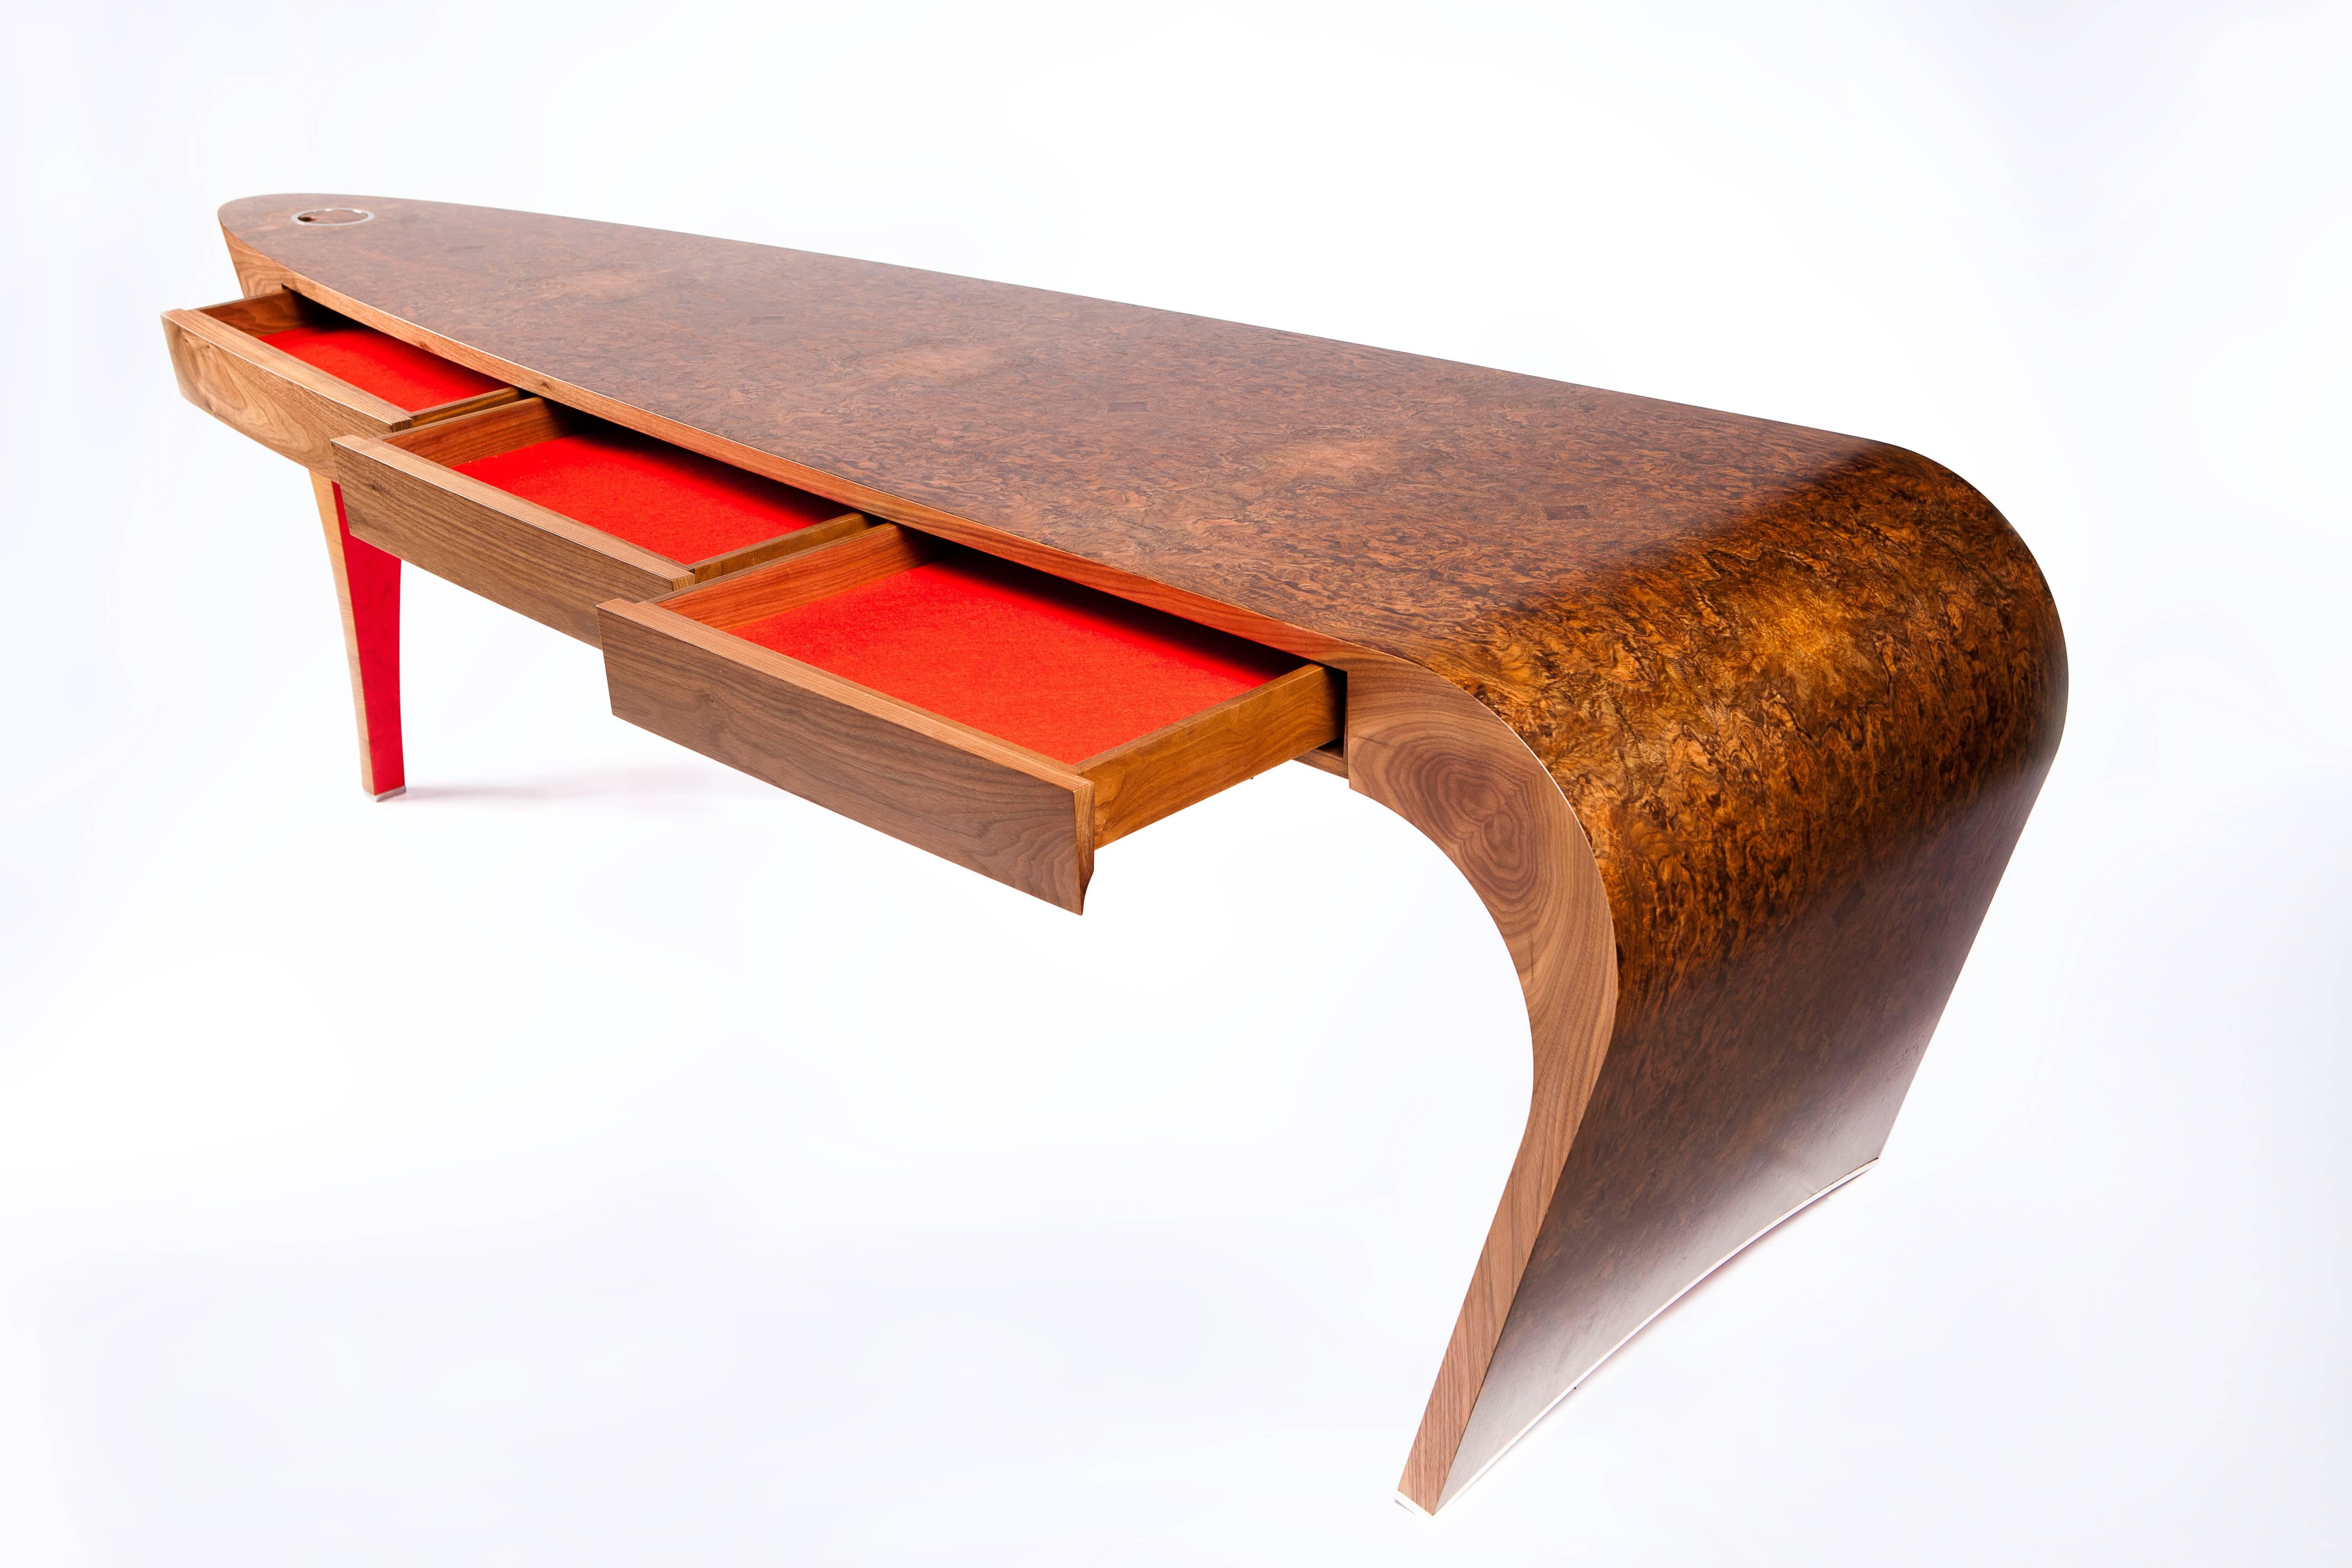 Stained Walnut and Red Bird's-Eye Maple Stiletto Shoe Desk or Dressing Table For Sale